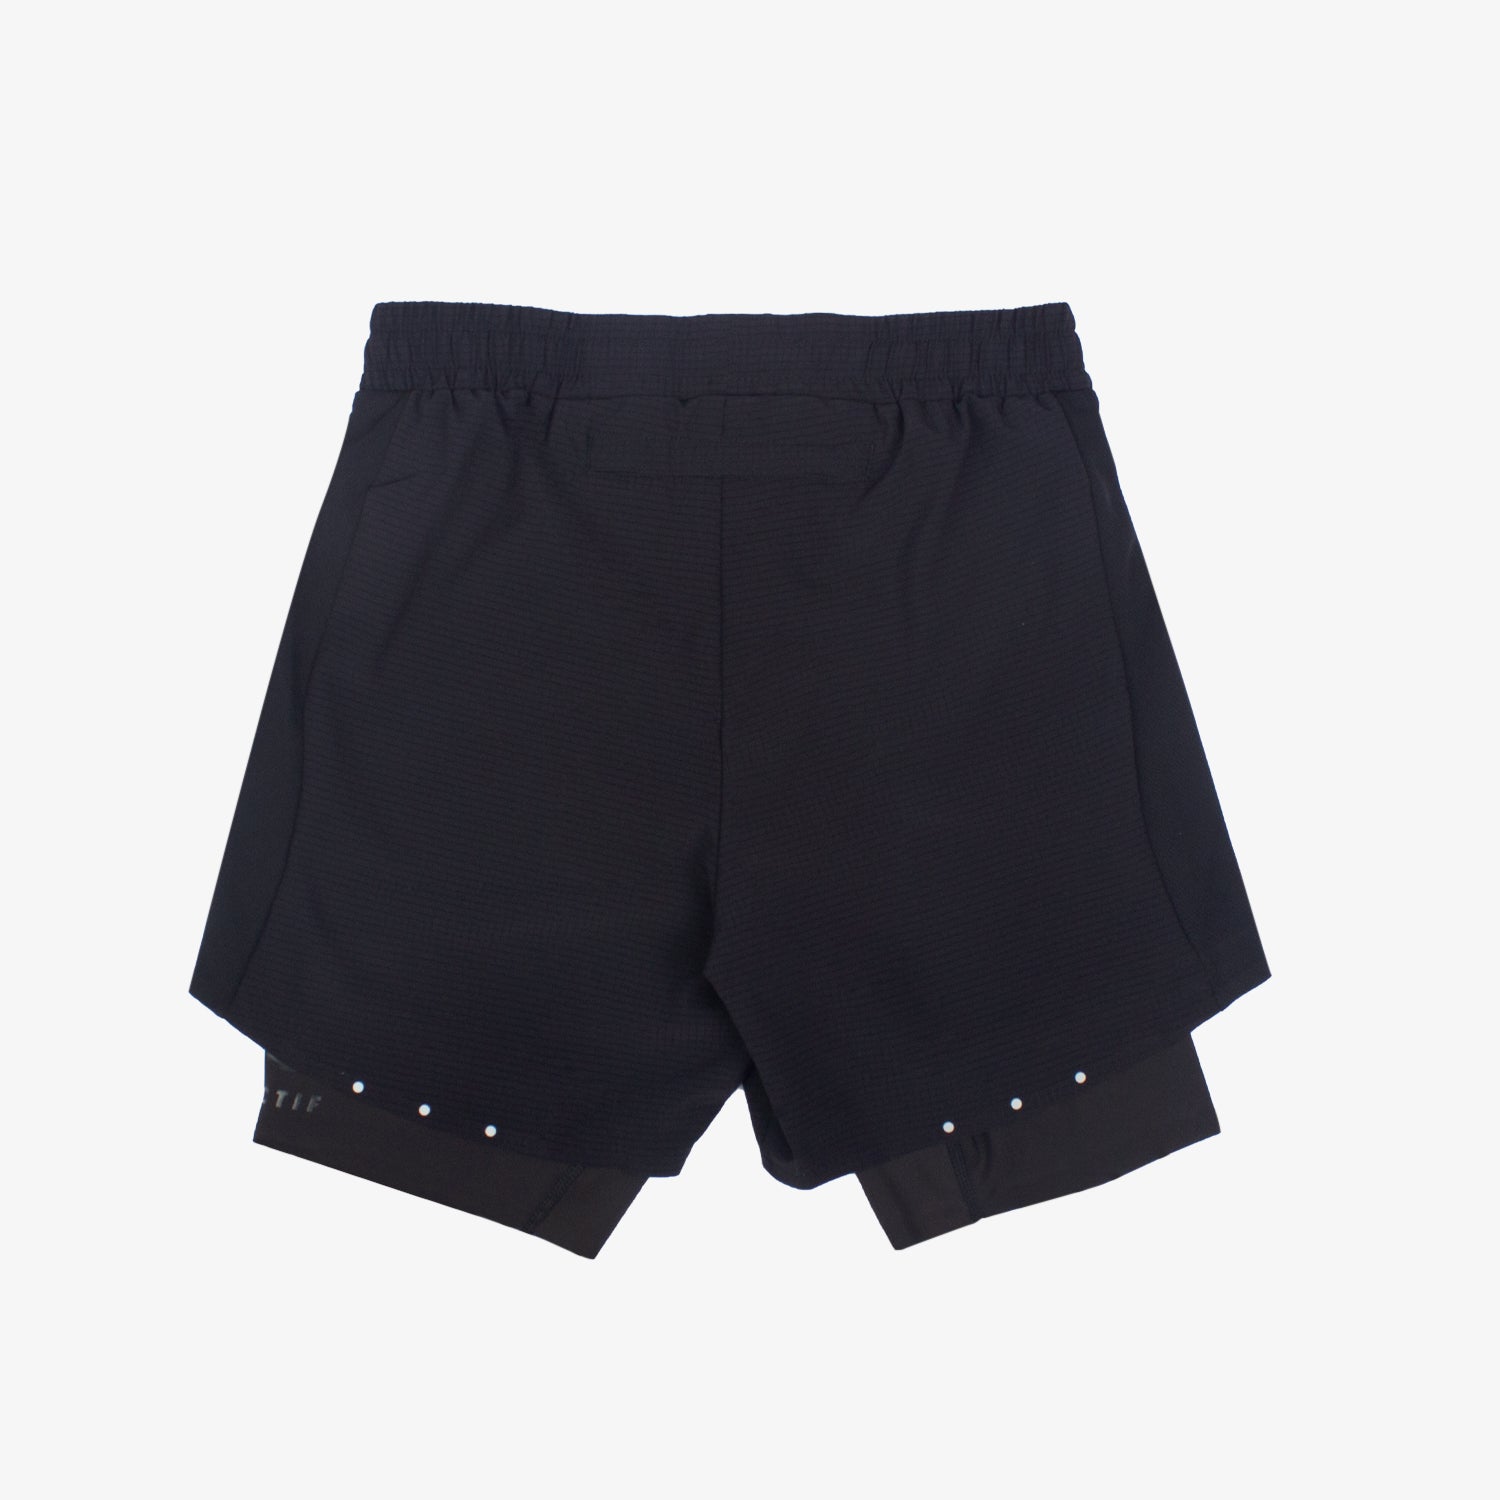 Core 2 in 1 Running Shorts - Black - Atlas Collectif